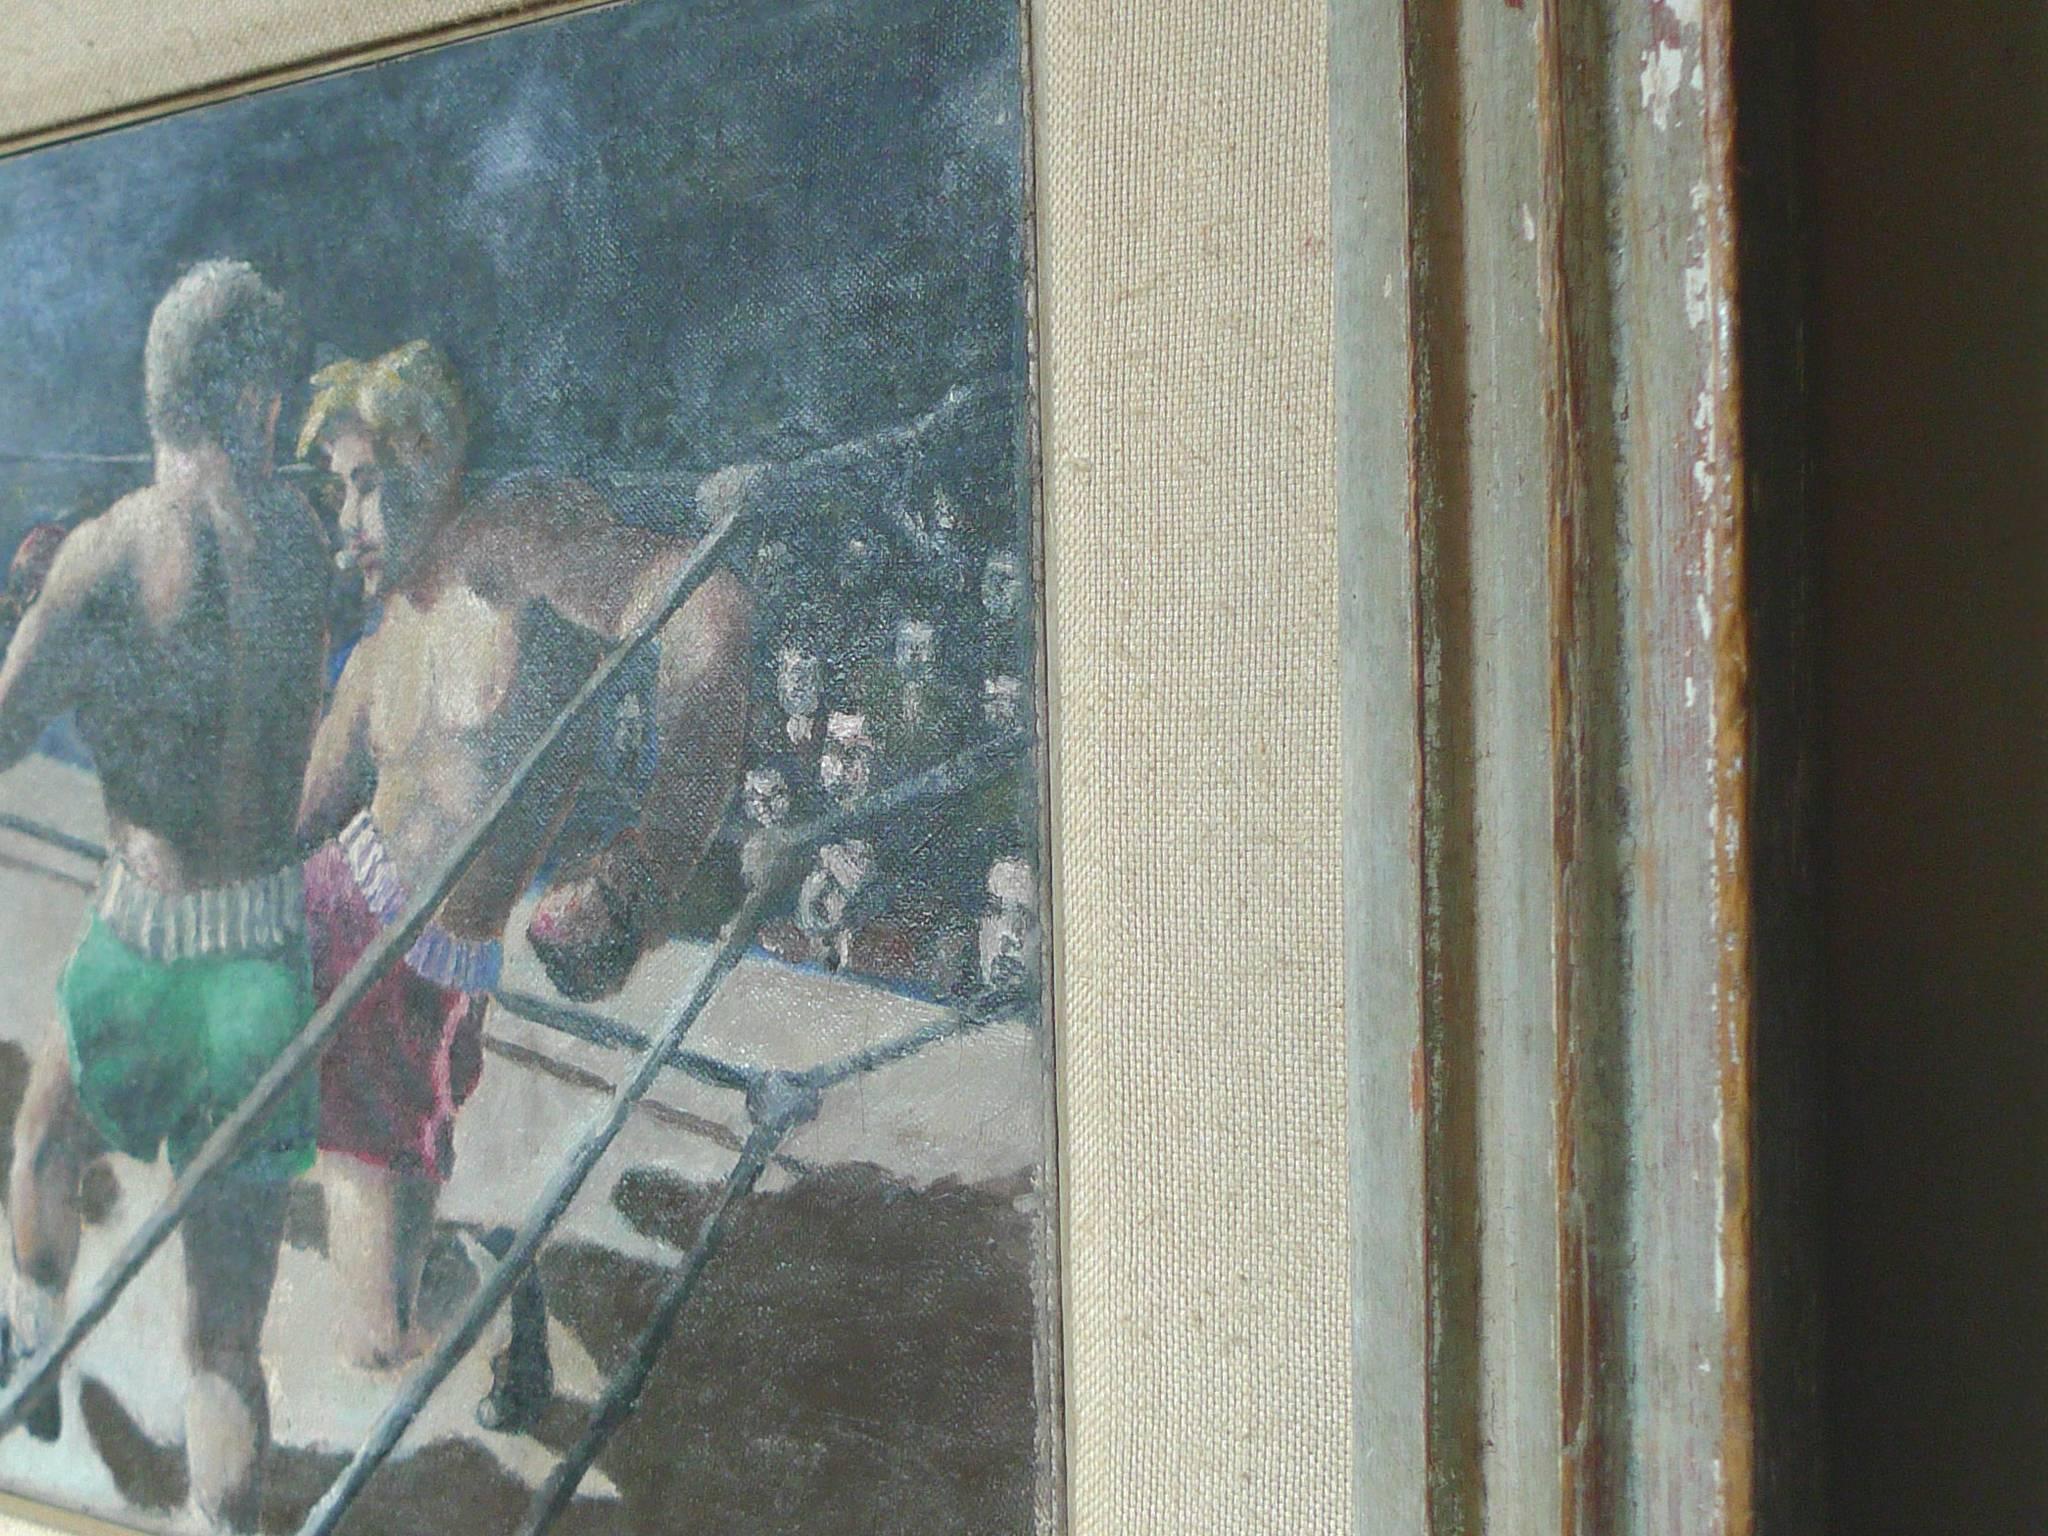 20th Century Boxing Match, Oil Painting by Unknown Artist, after Robert Riggs